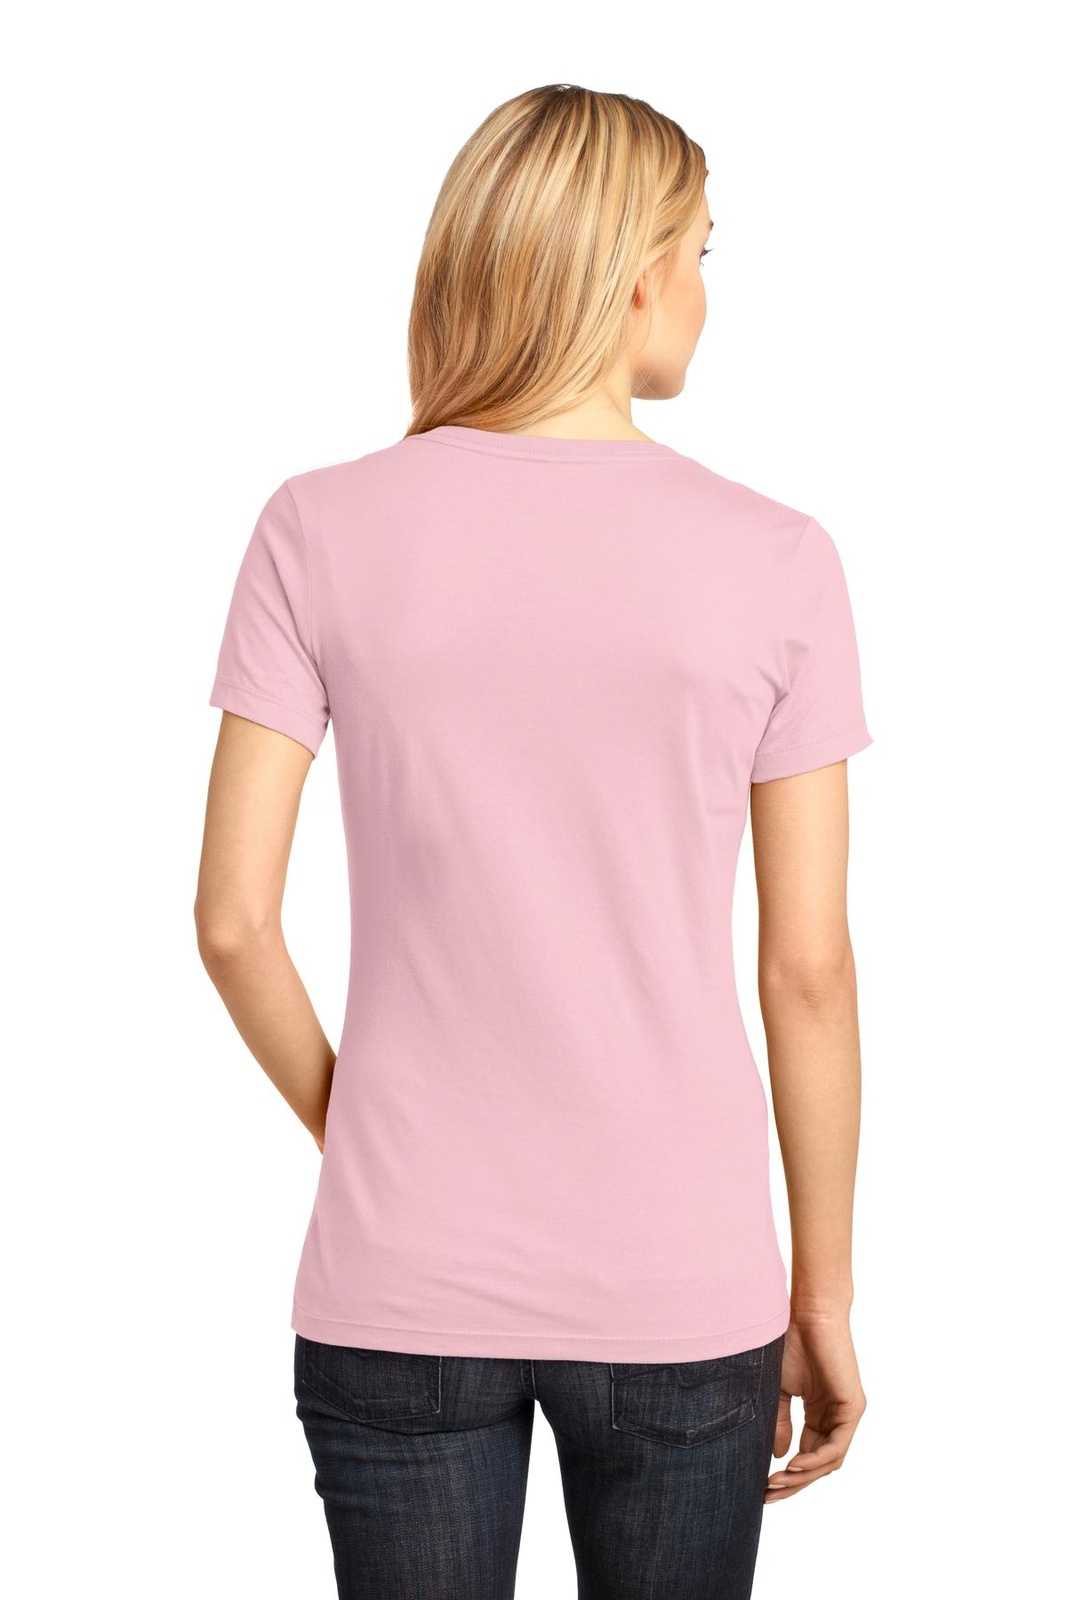 District DM1170L Women's Perfect Weight V-Neck Tee - Light Pink - HIT a Double - 1